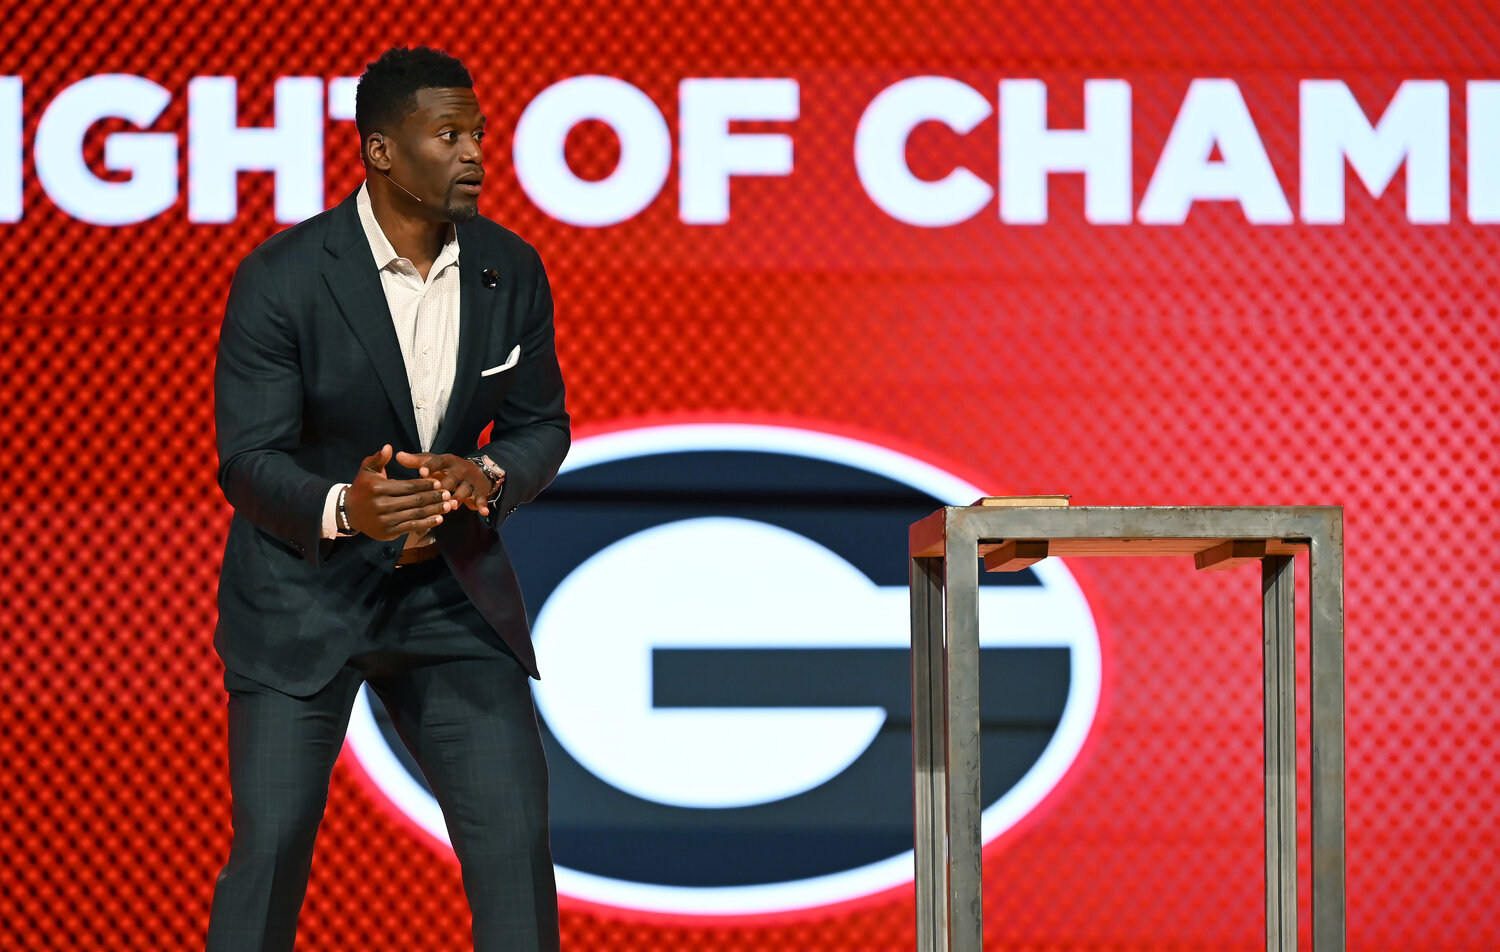 Ben Watson, former Georgia player and NFL tight end, speaks during the Fellowship of Christian Athletes UGA Night of Champions event on Friday at First Baptist Church of Woodstock. (Index/Henry Durand)